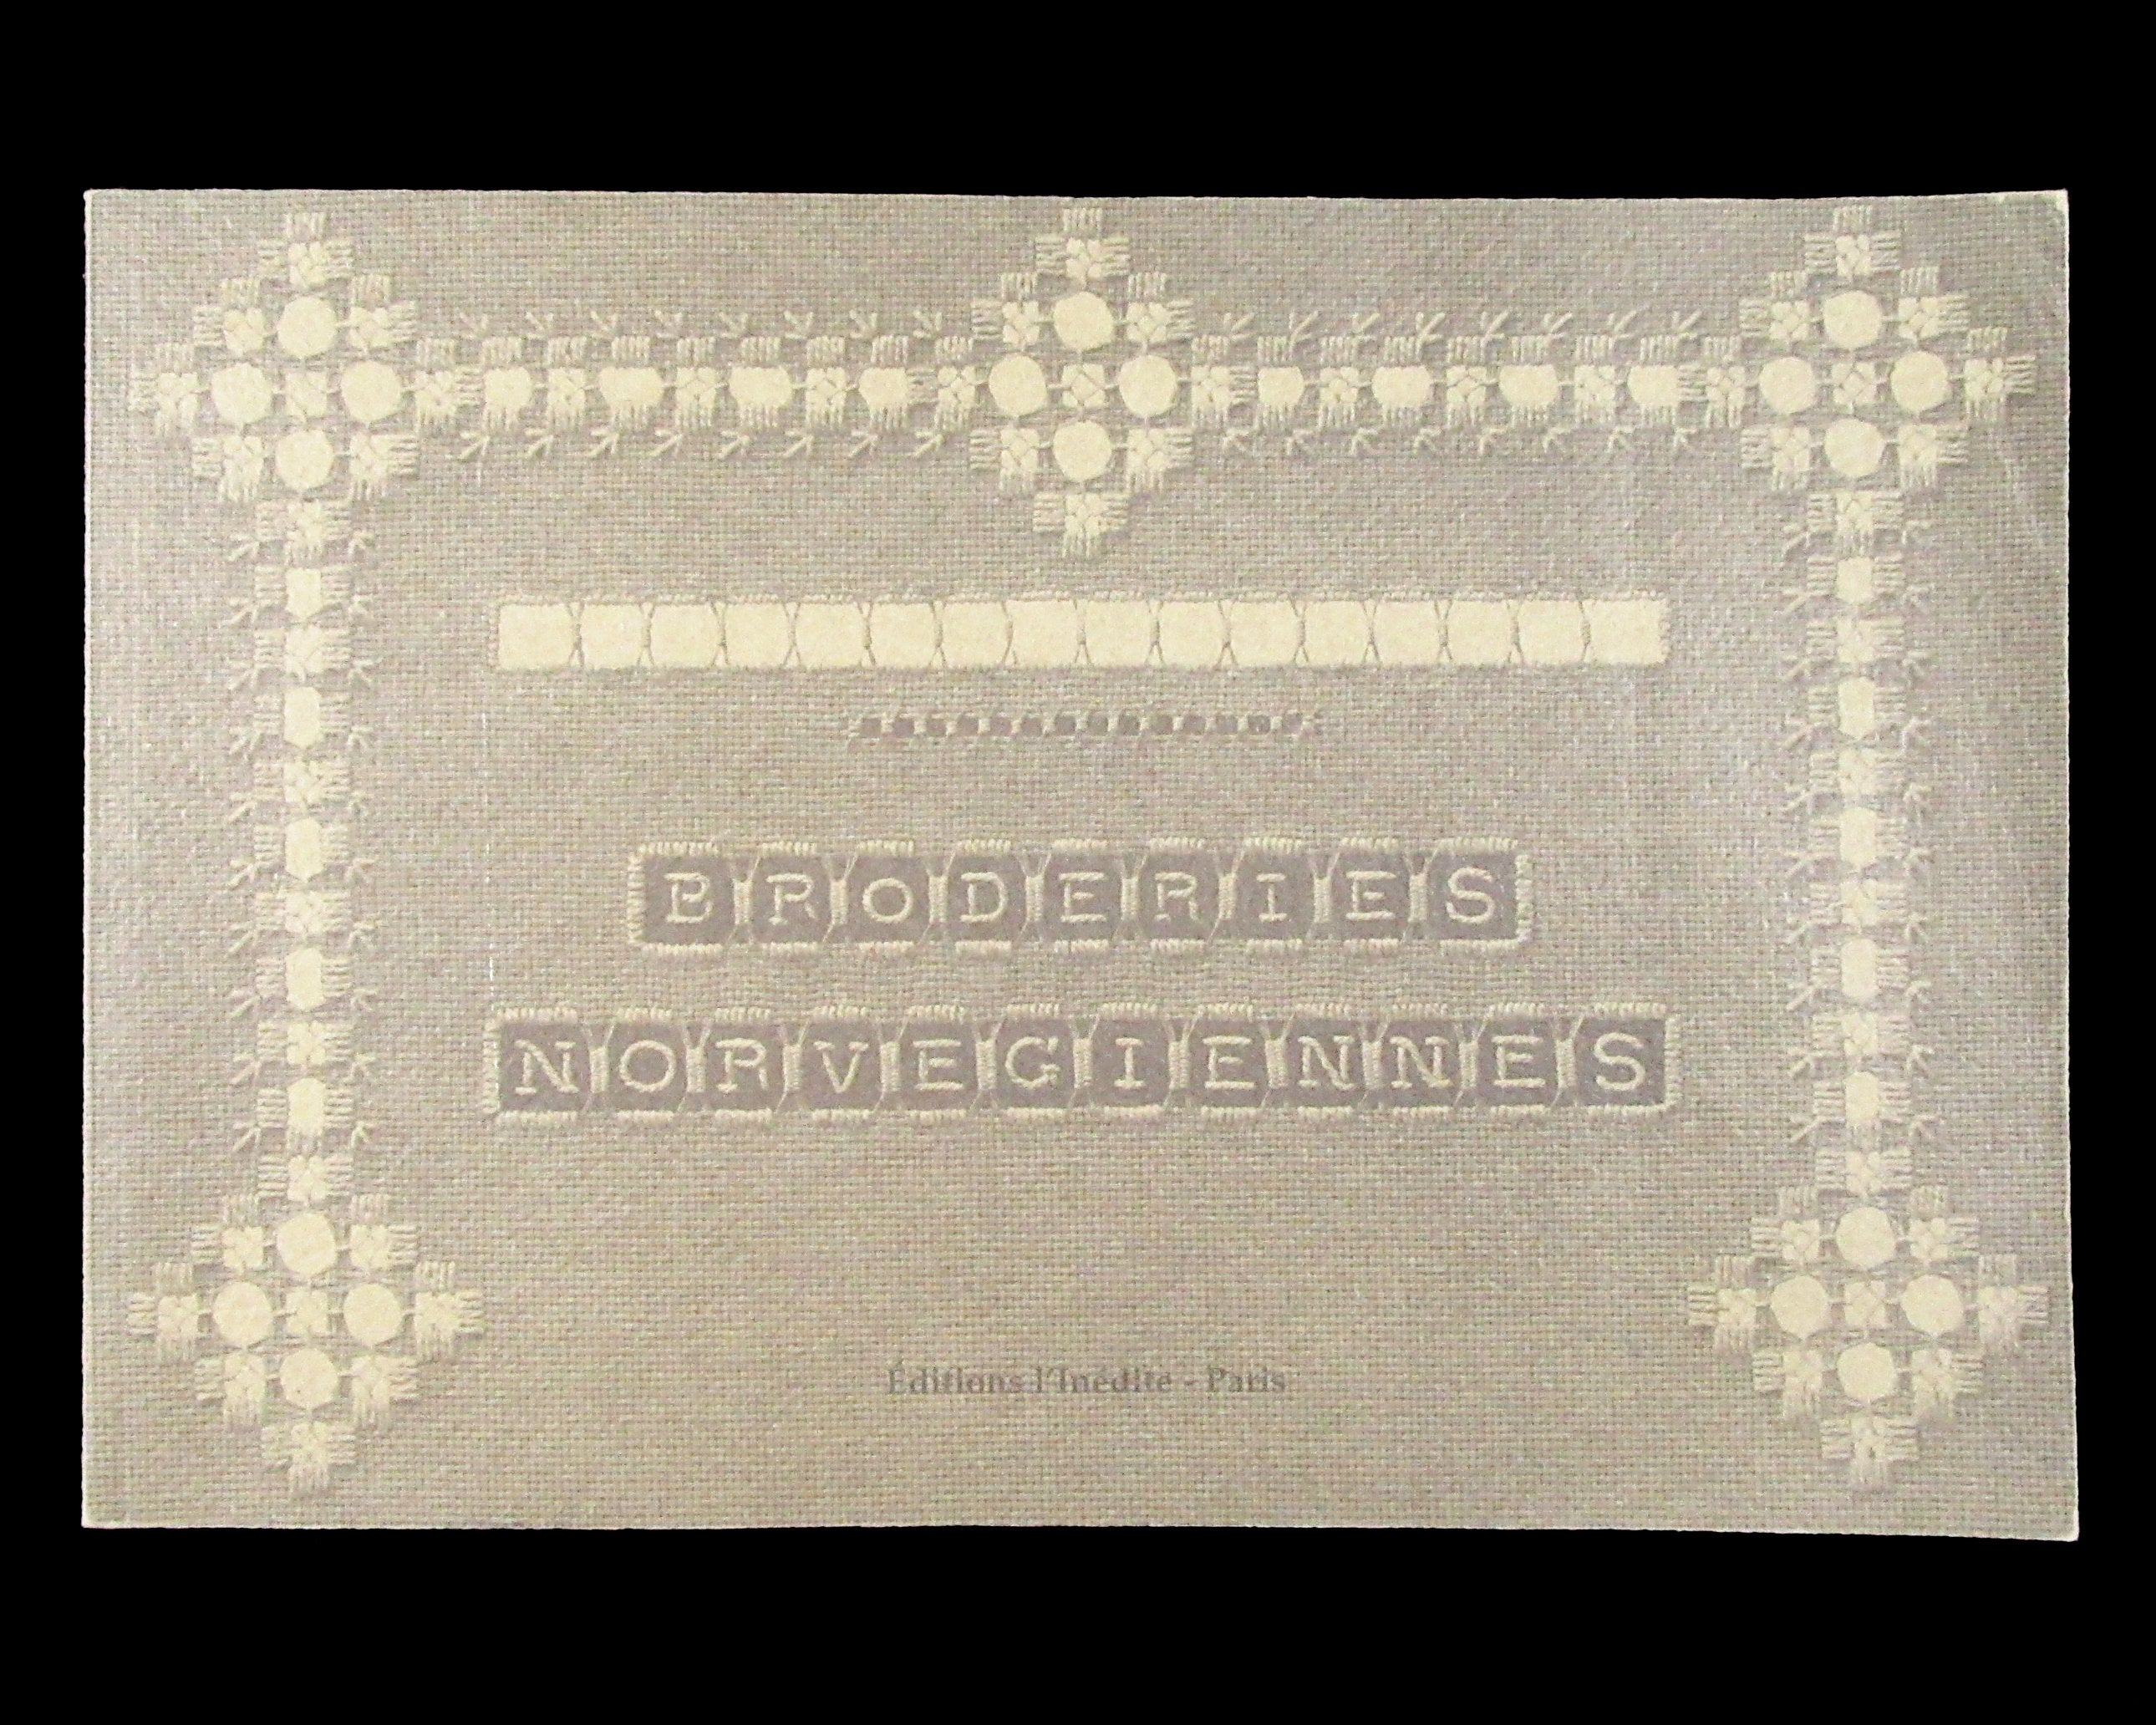 Norwegian Embroidery Patterns Book Embroidery Patterns For Norwegian Hardanger Embroidery Traditional Designs Bunad Apron Blouse Regional Fashion History Norway Folk